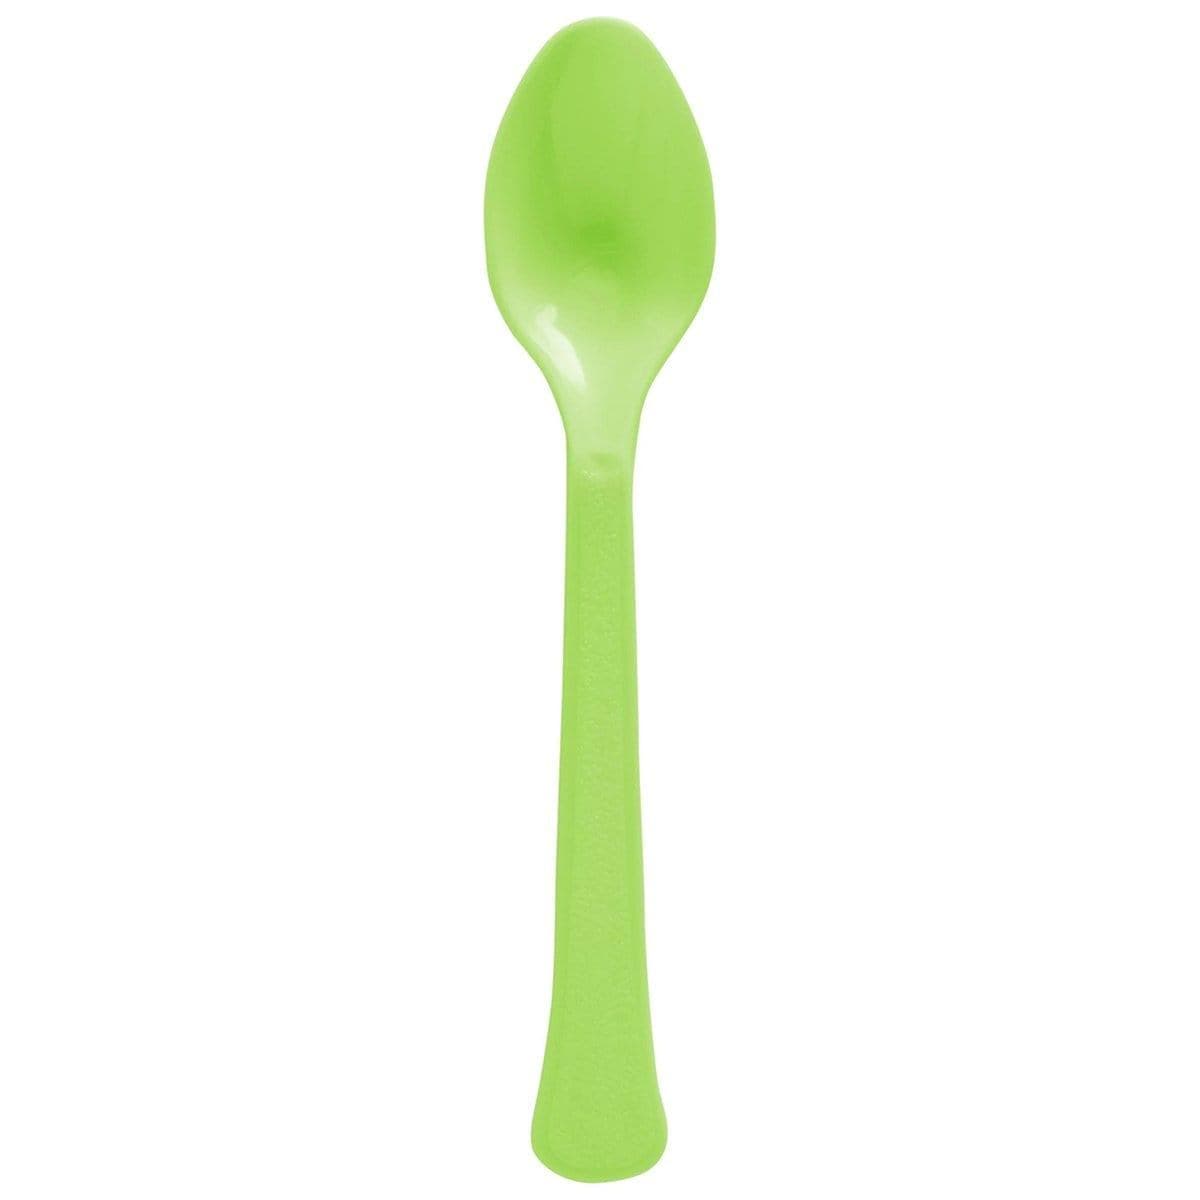 Buy Plasticware Kiwi Plastic Spoons, 20 Count sold at Party Expert